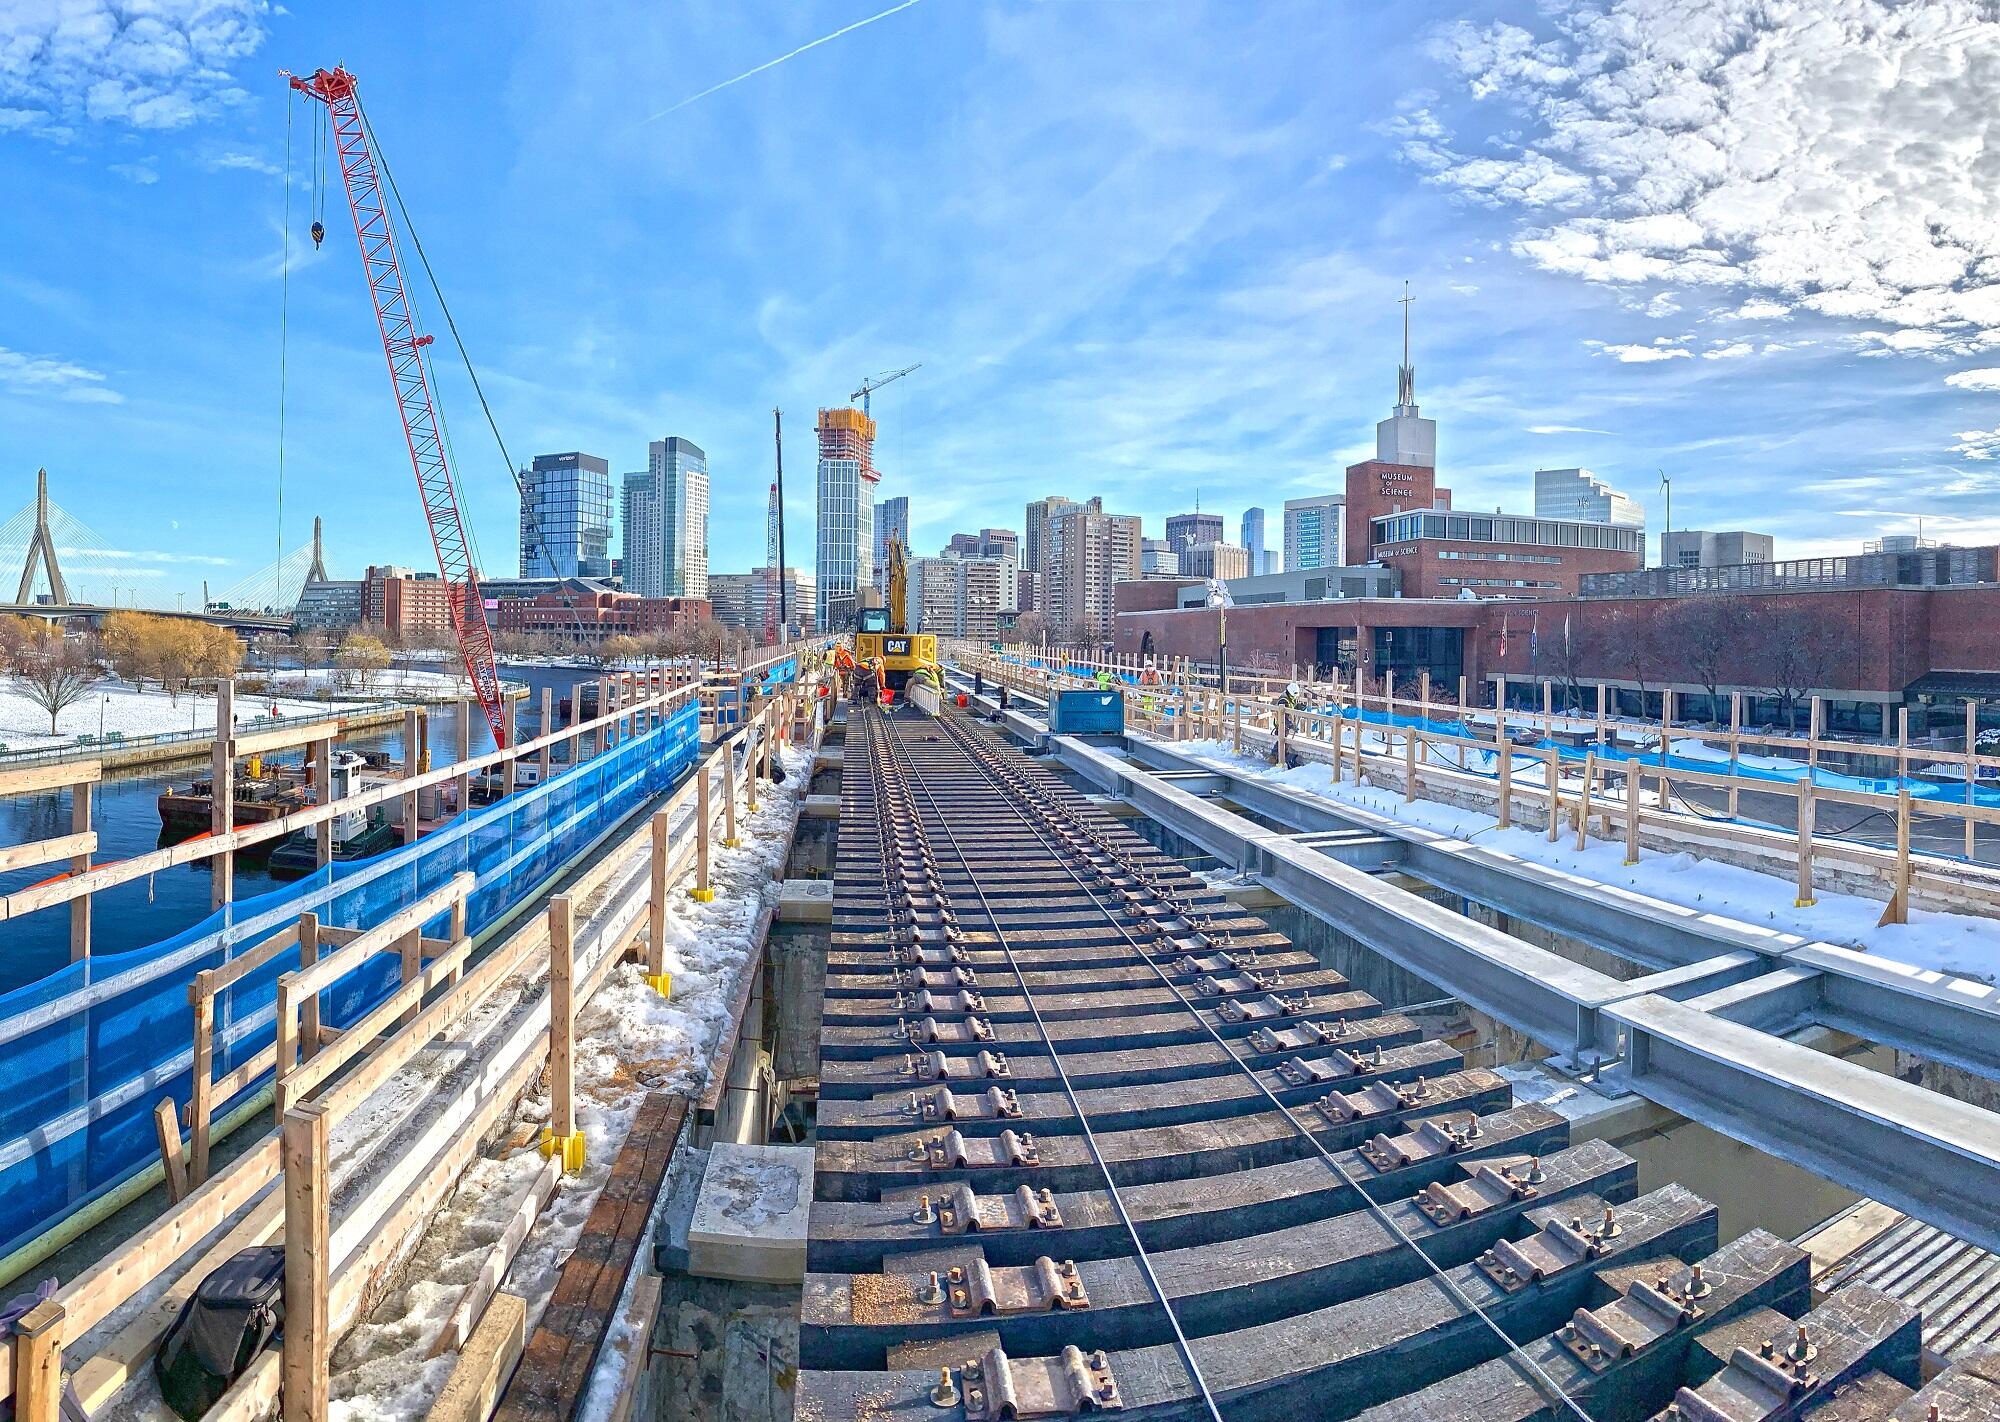 Crews work on rail ties along the Lechmere Viaduct (January 15, 2021)